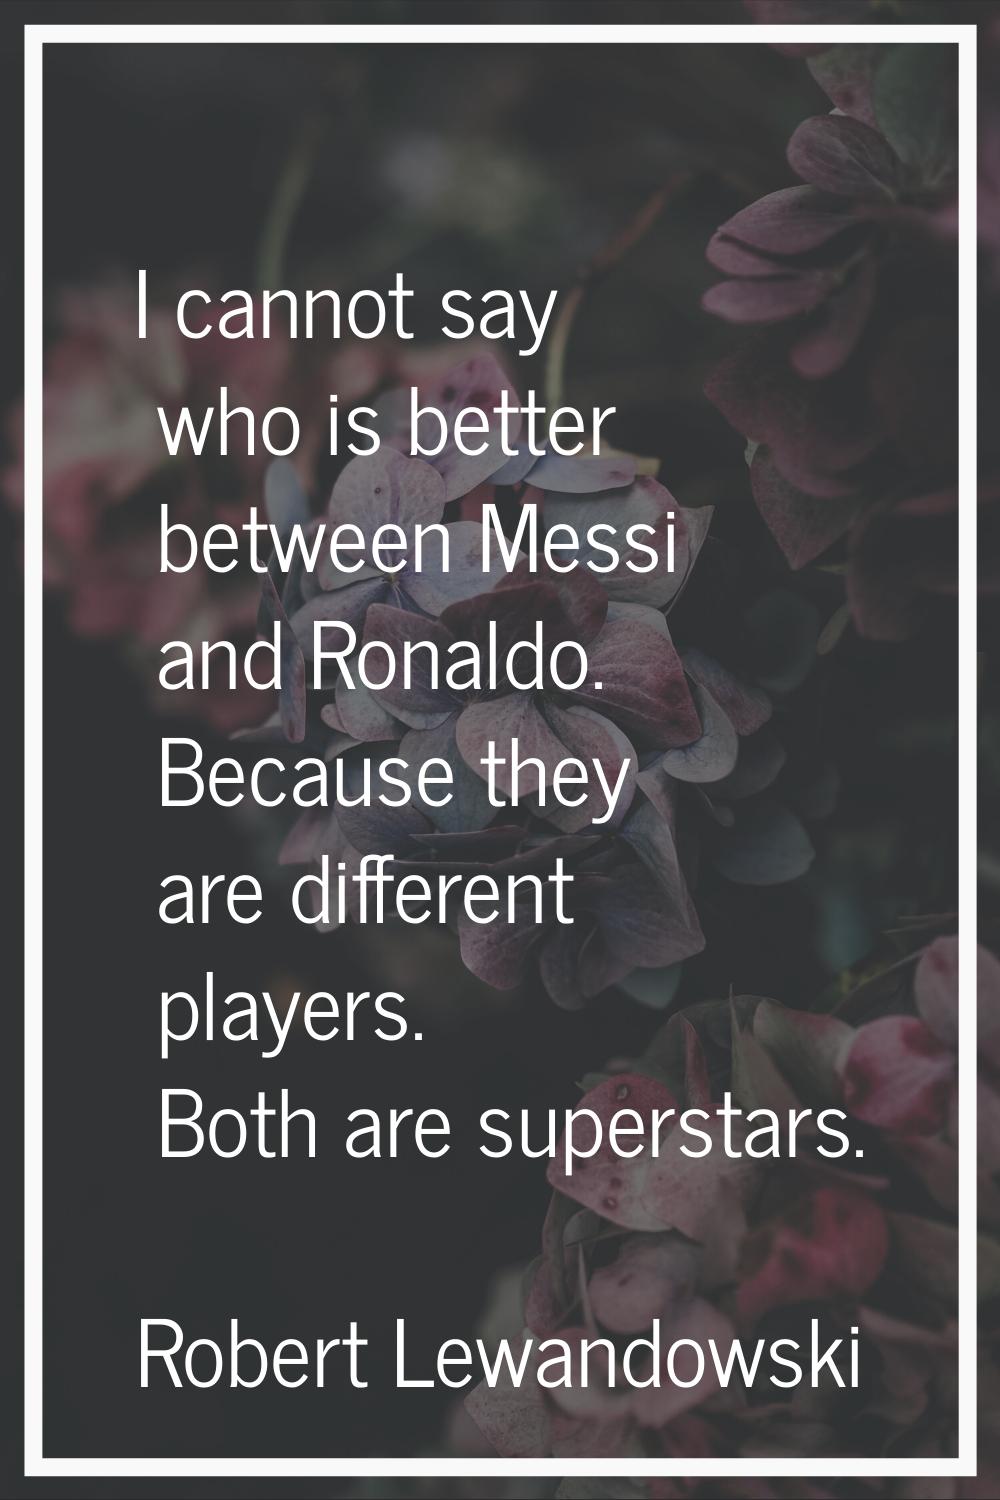 I cannot say who is better between Messi and Ronaldo. Because they are different players. Both are 